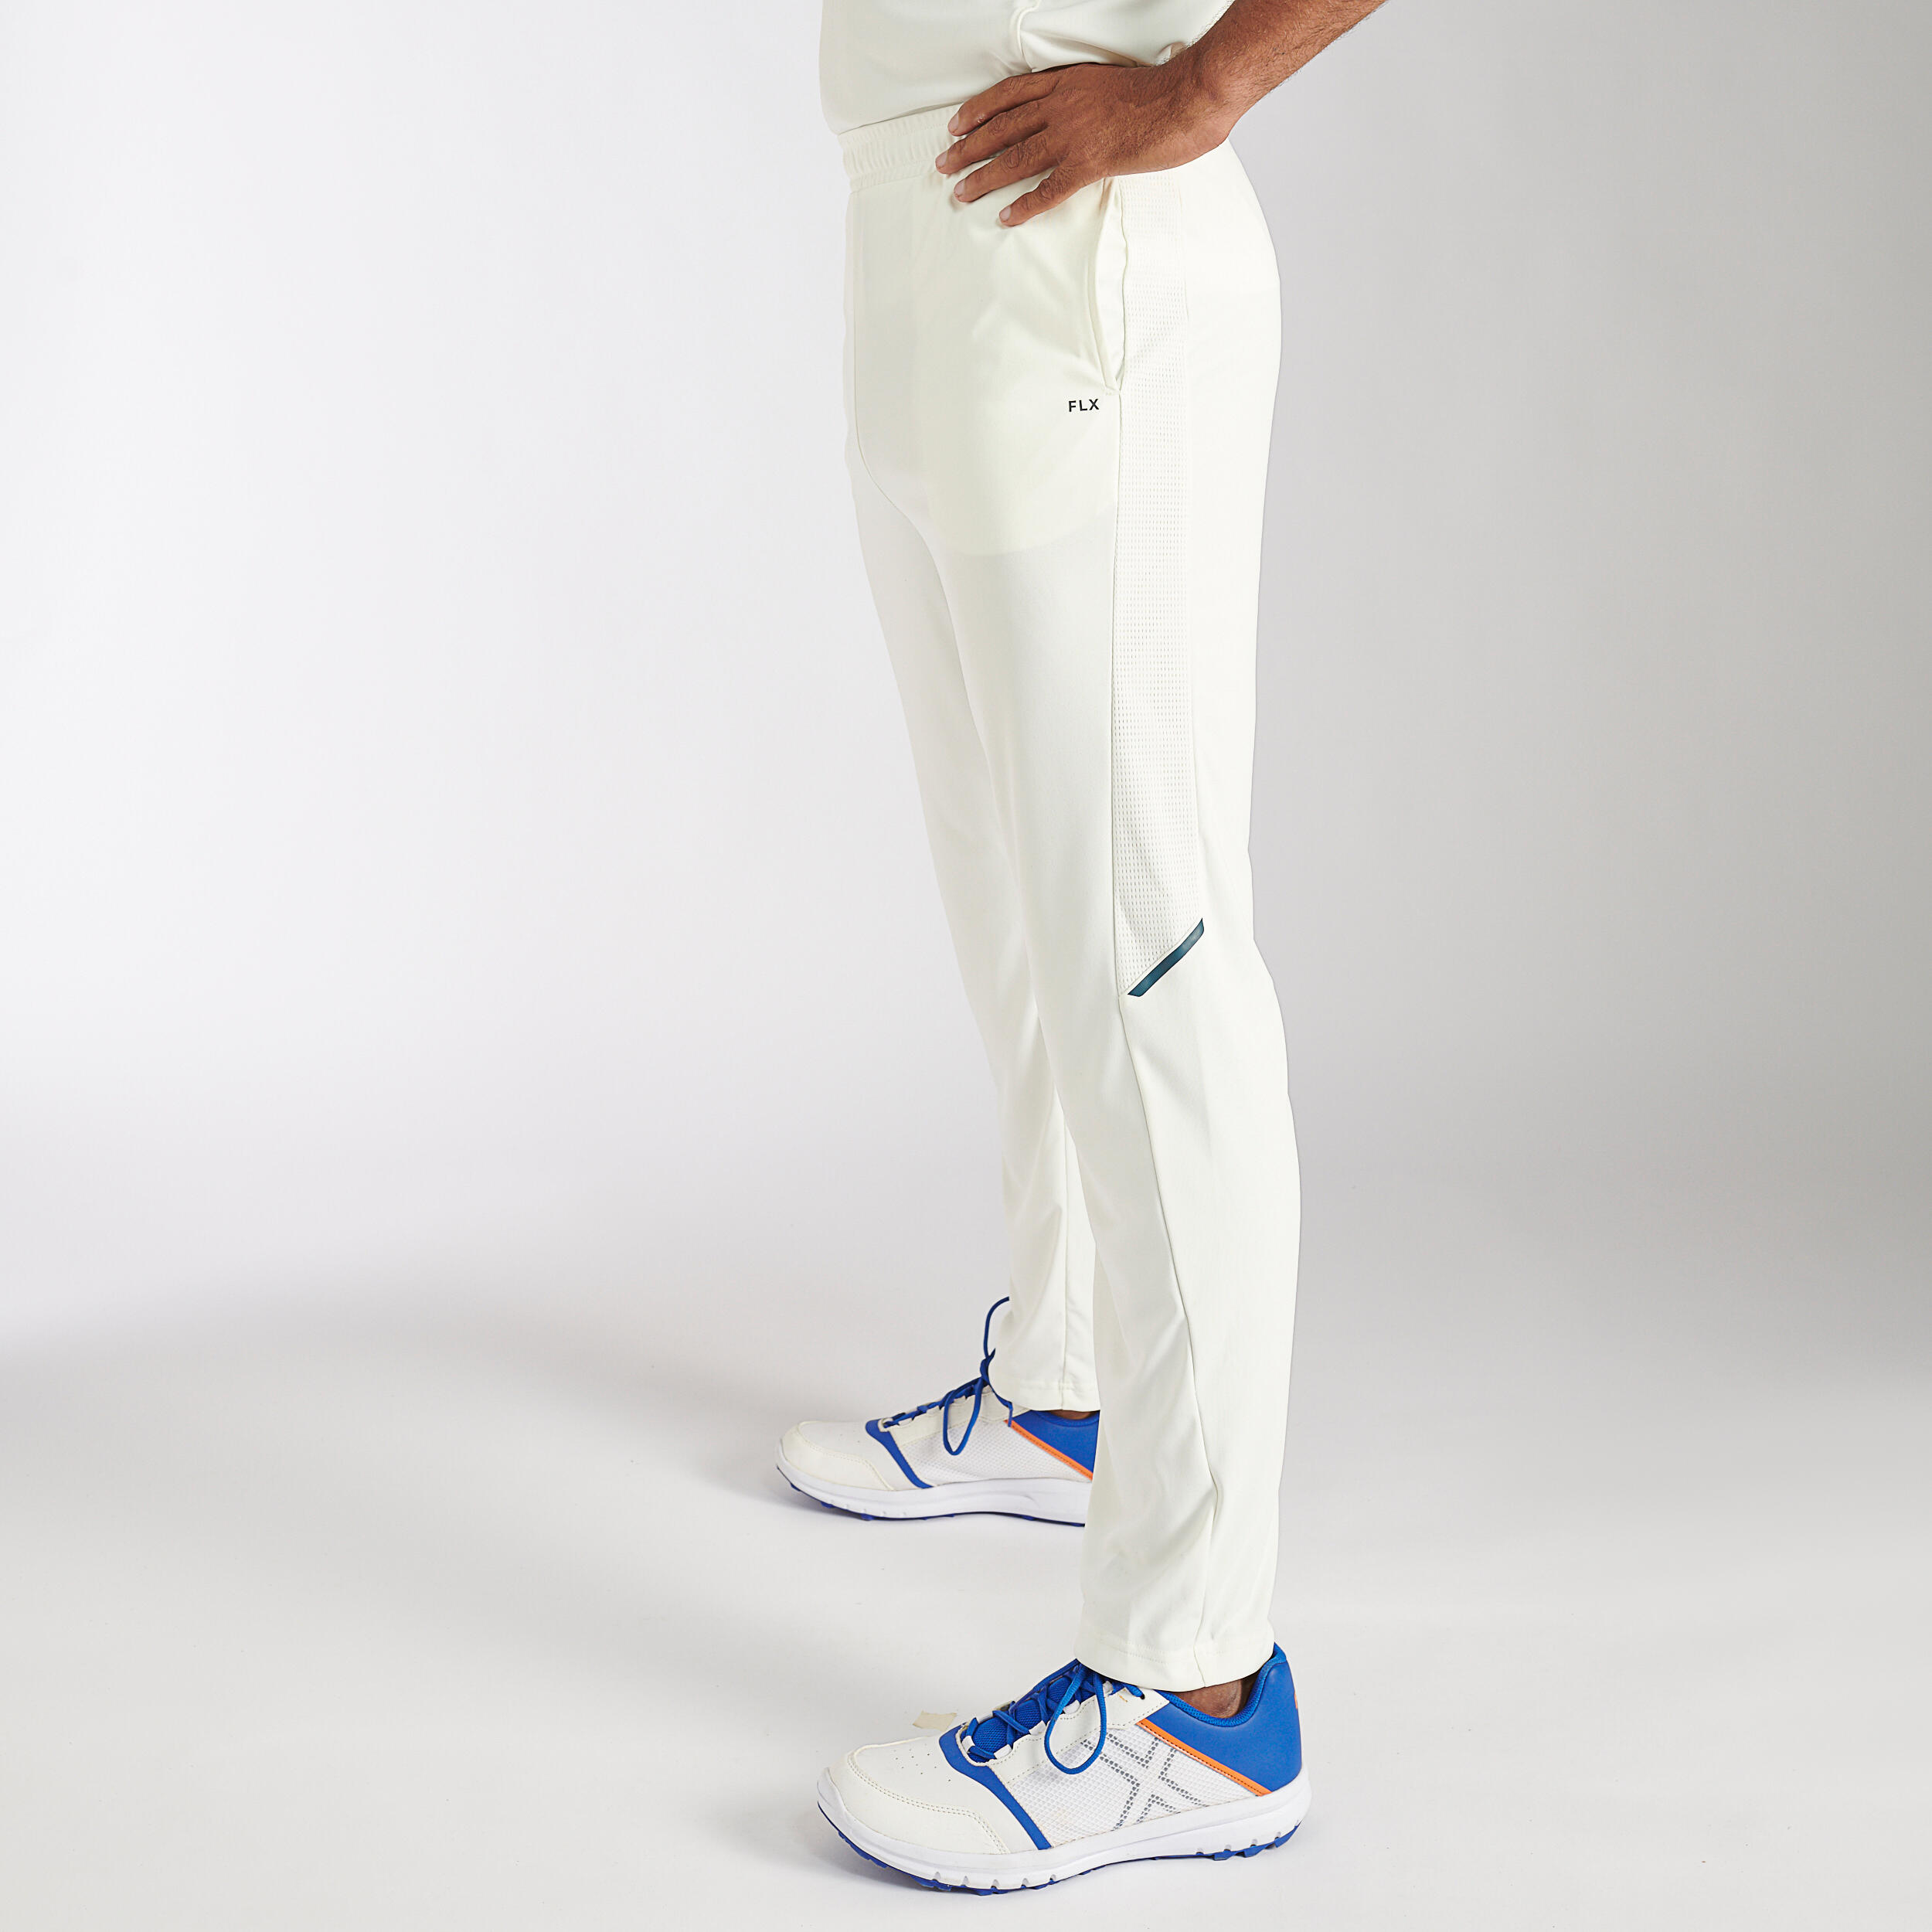 MENS CRICKET ADVANCED ABRASION RESISTANT TRACKPANTS TS 900 DRB WHITE